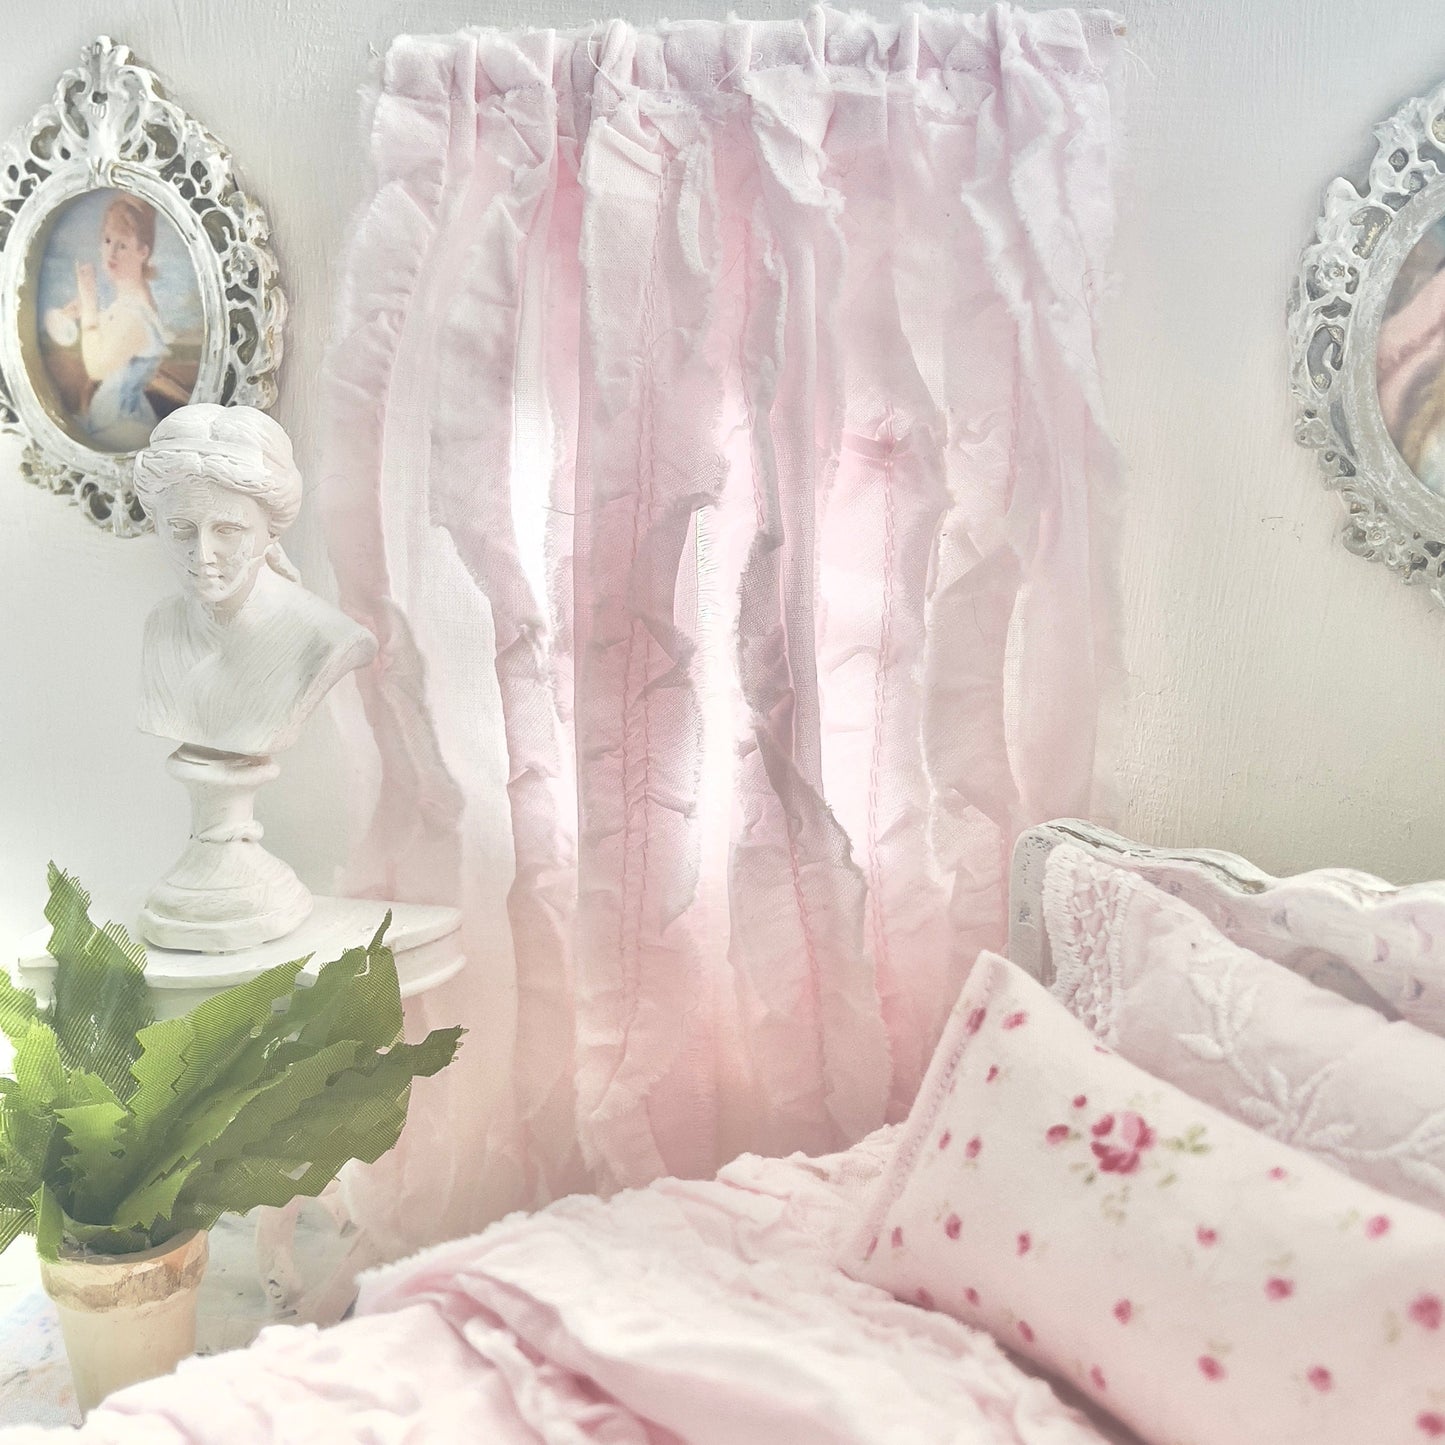 Chantallena Doll House Dollhouse Accessories (Curtains | Light  2 Panel Cotton Curtains |Light Shabby Pink